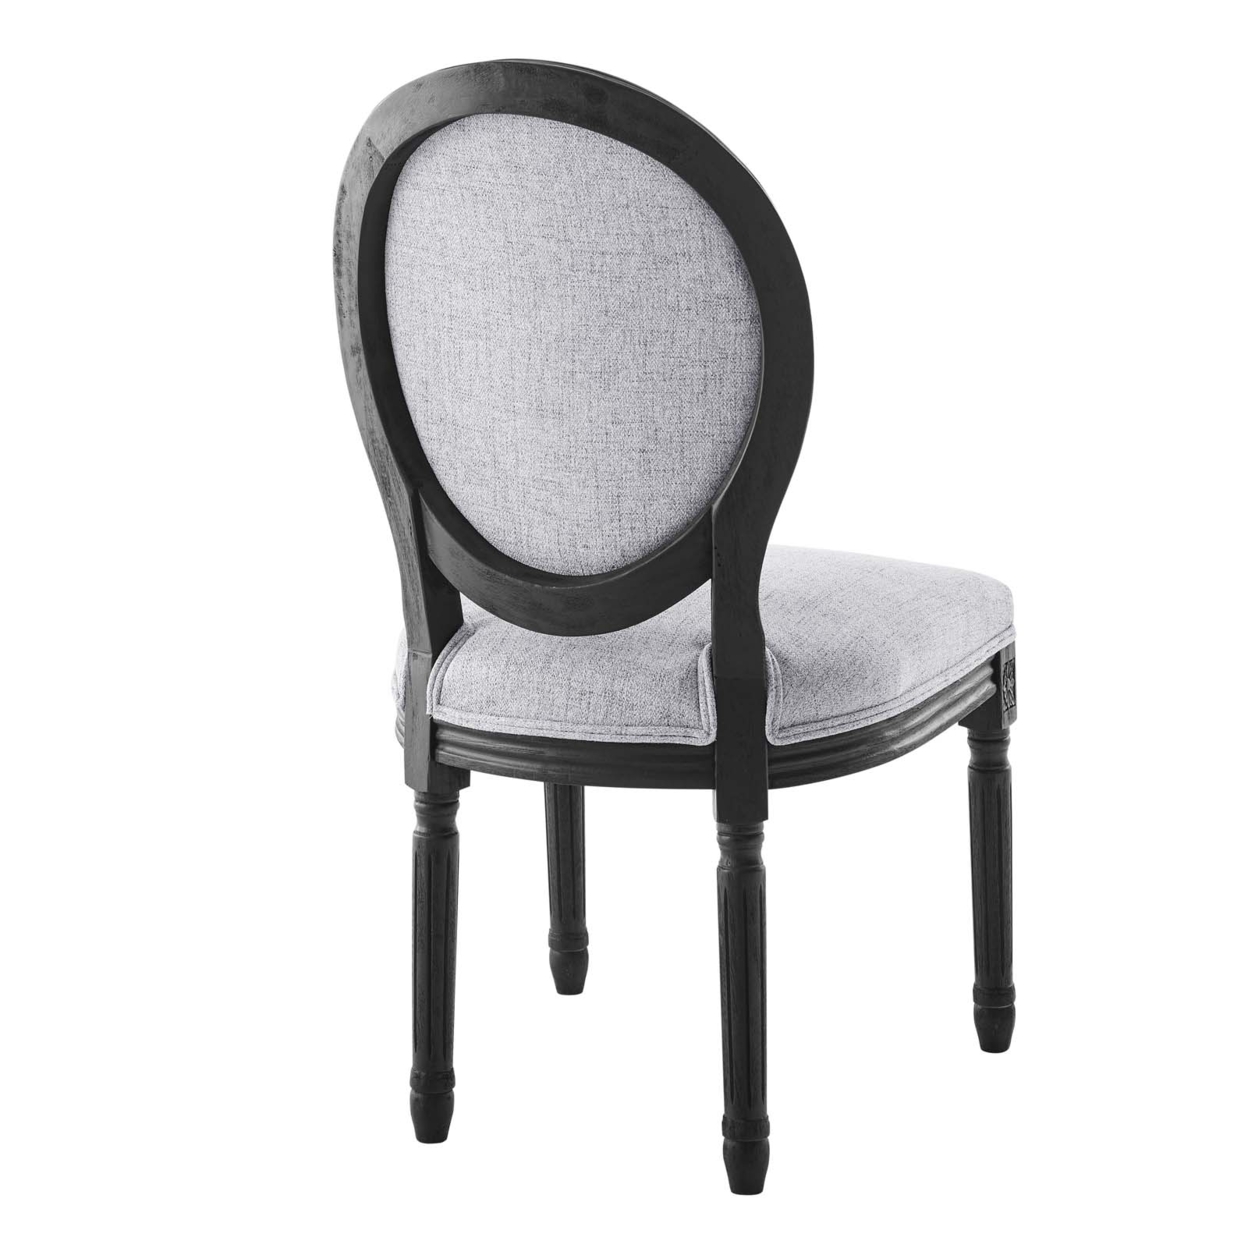 Arise Vintage French Upholstered Fabric Dining Side Chair, Black Light Gray